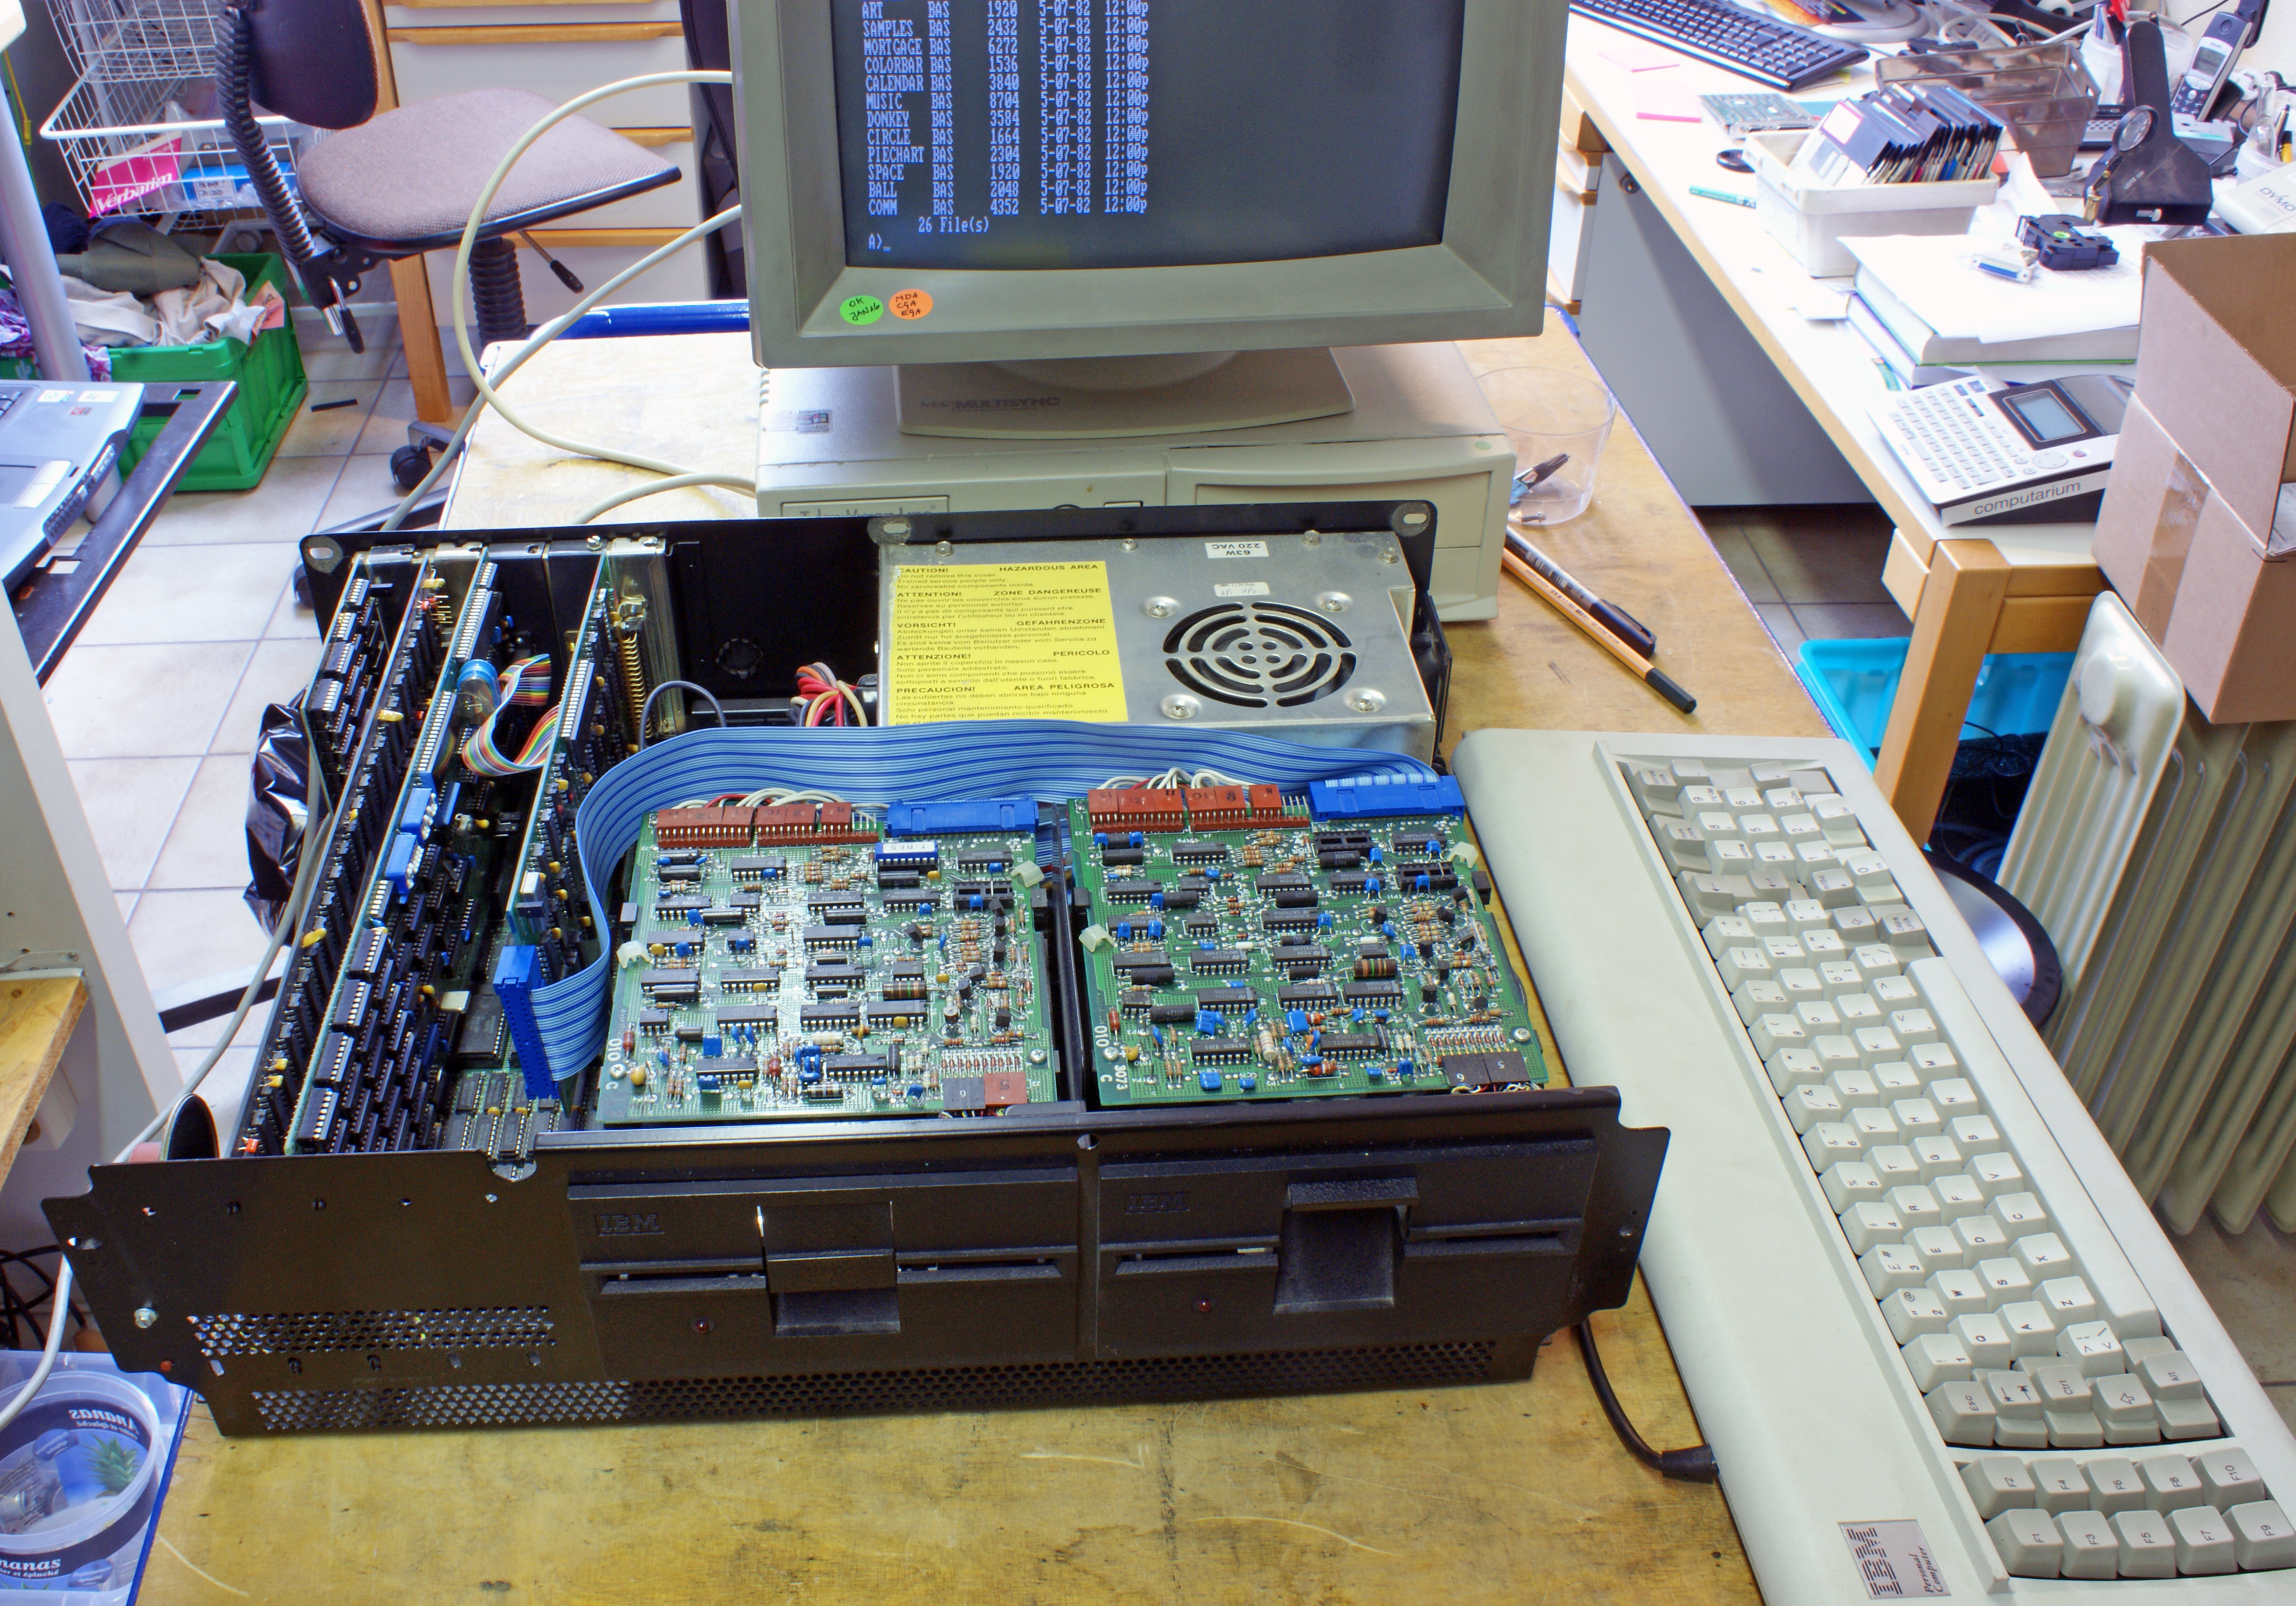 DSC06214a.JPG - Claude du Fays donated a vintage 5150 original IBM PC. It looked great, but had problems with booting DOS. The cause were bad contacts of the ISA connectors, easily solved.